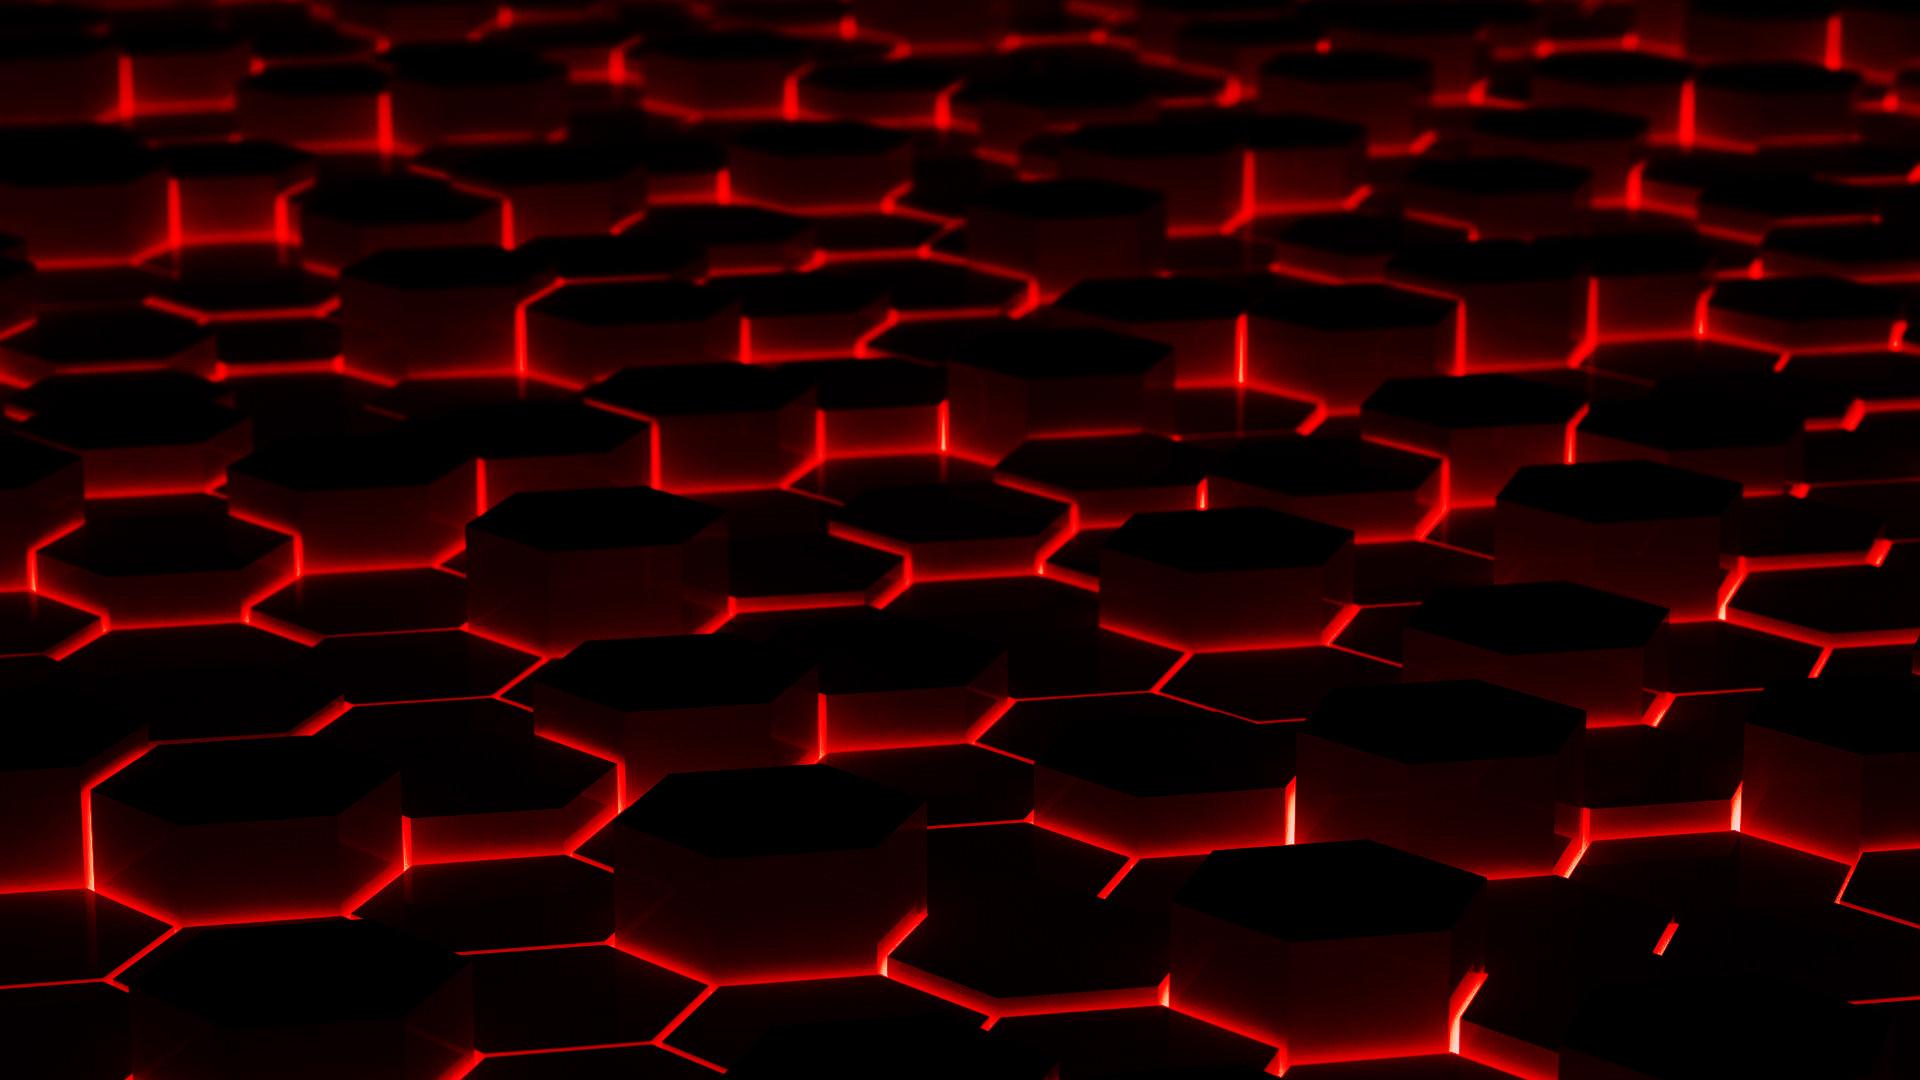 Simple Black and Red Block wallpaper (1920x1080)